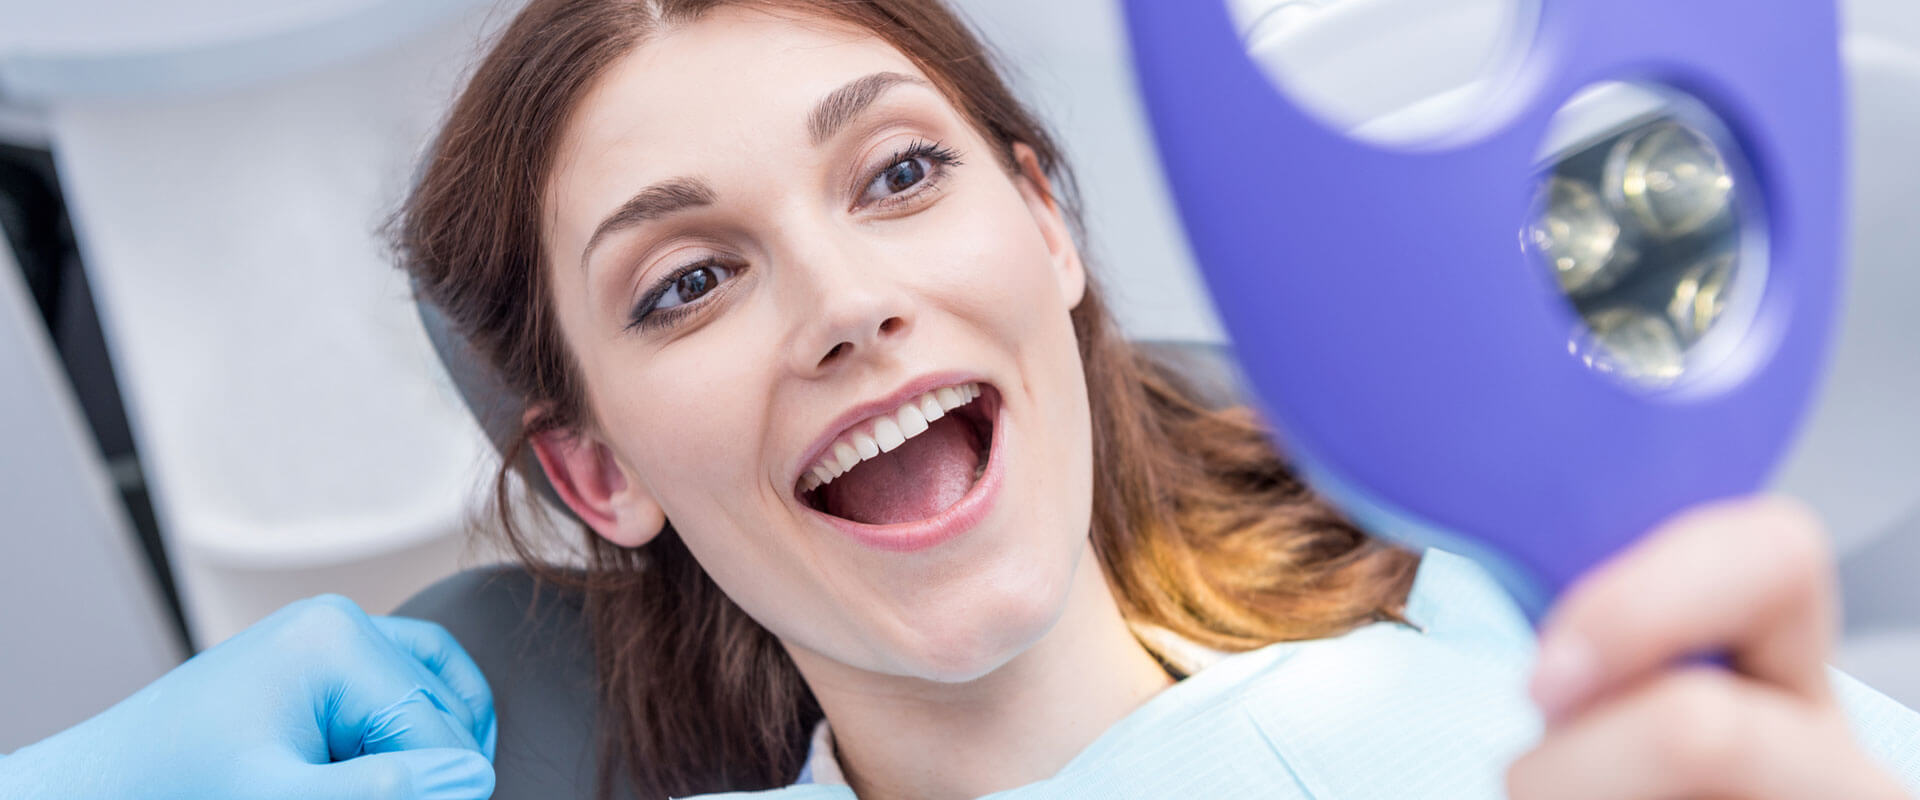 Excited female patient looking at her teeth in a hand mirror after teledentistry